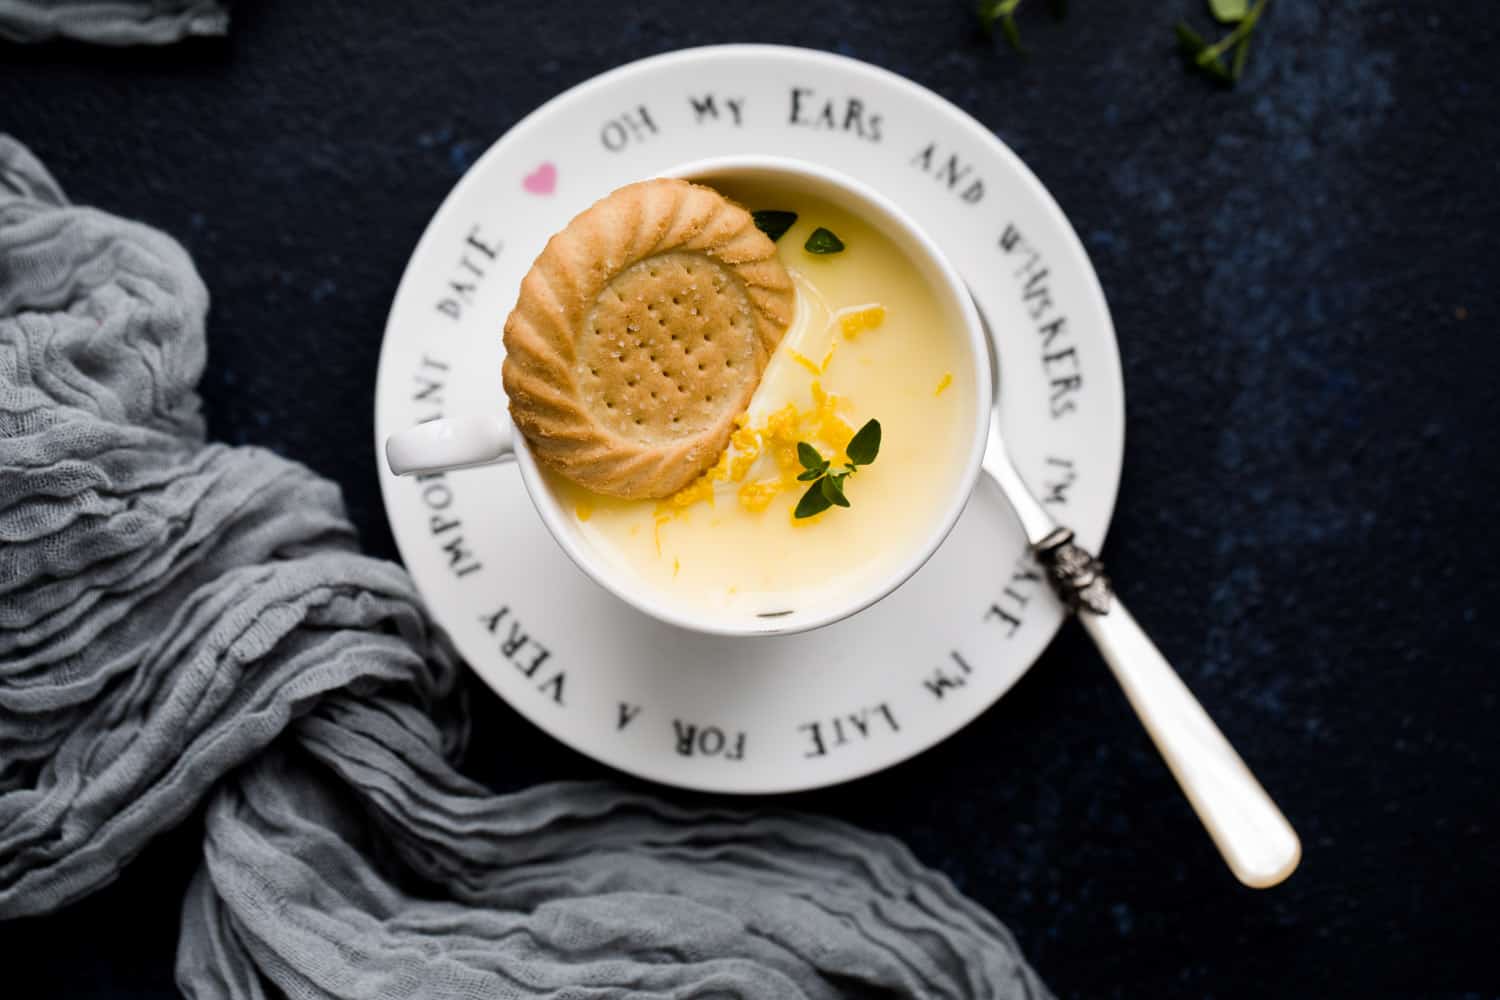 A lemon posset dessert in a teacup with a shortbread biscuit balanced on top